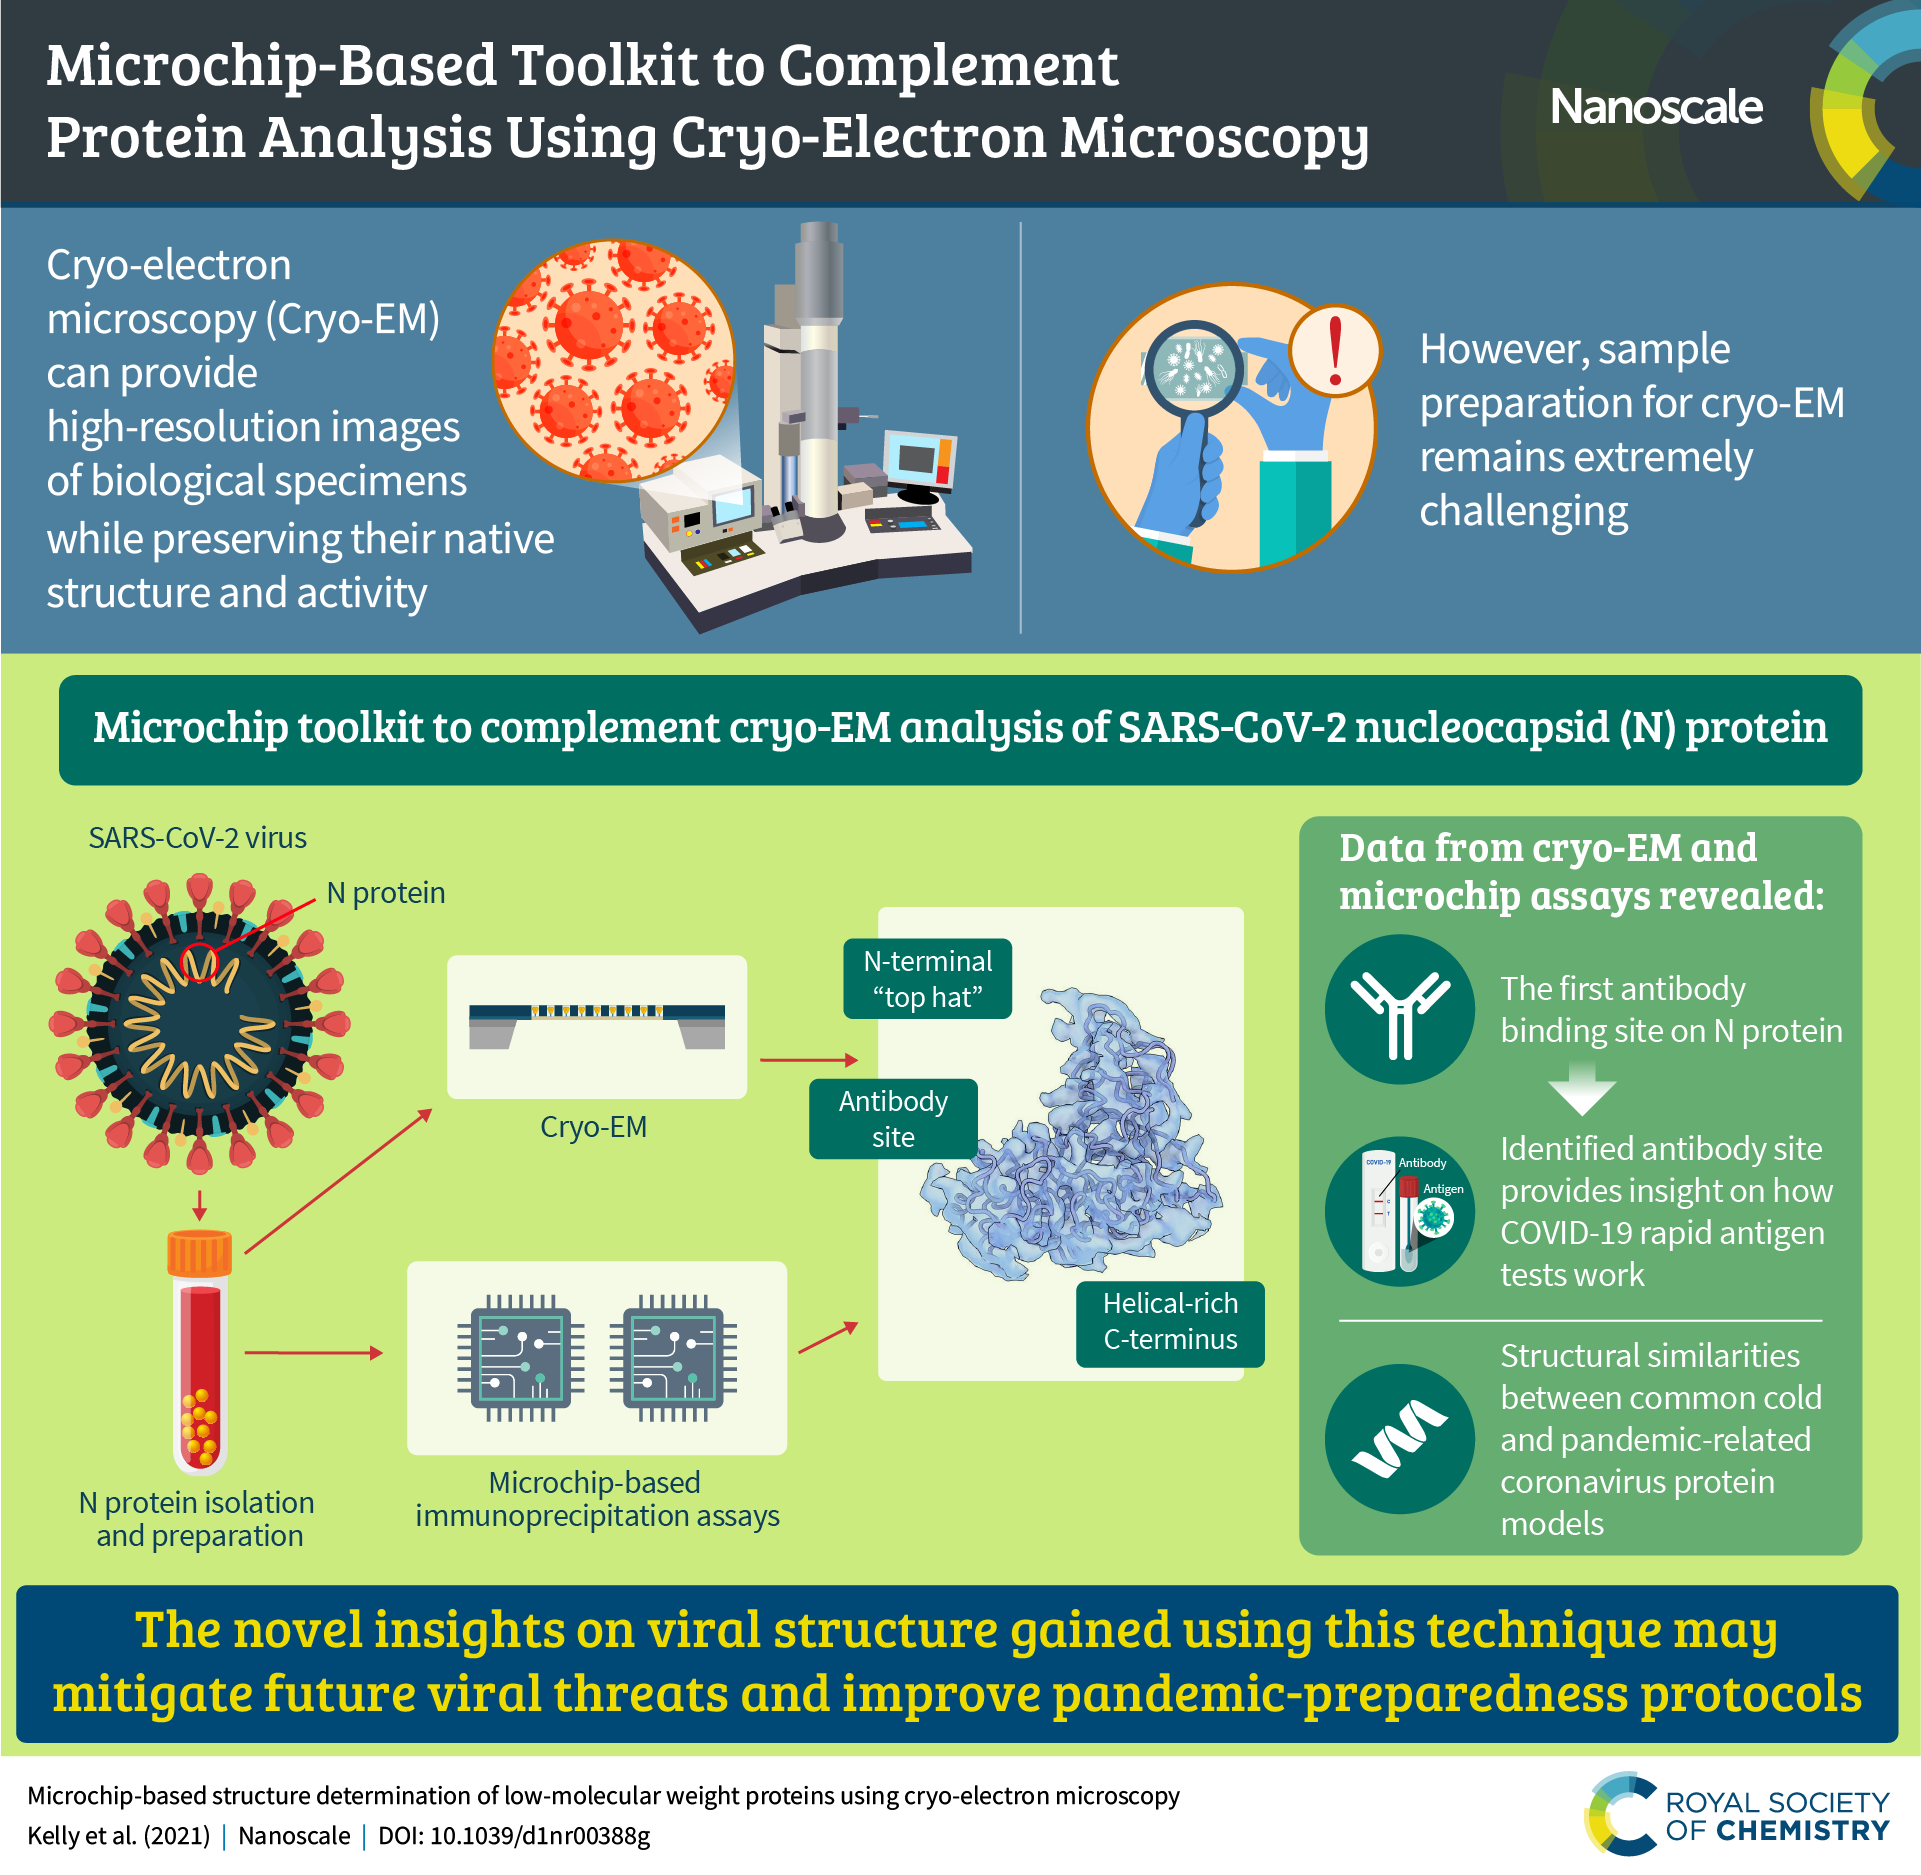 An infographic summarising the content of the article “Microchip-based structure determination of low-molecular weight proteins using cryo-electron microscopy"